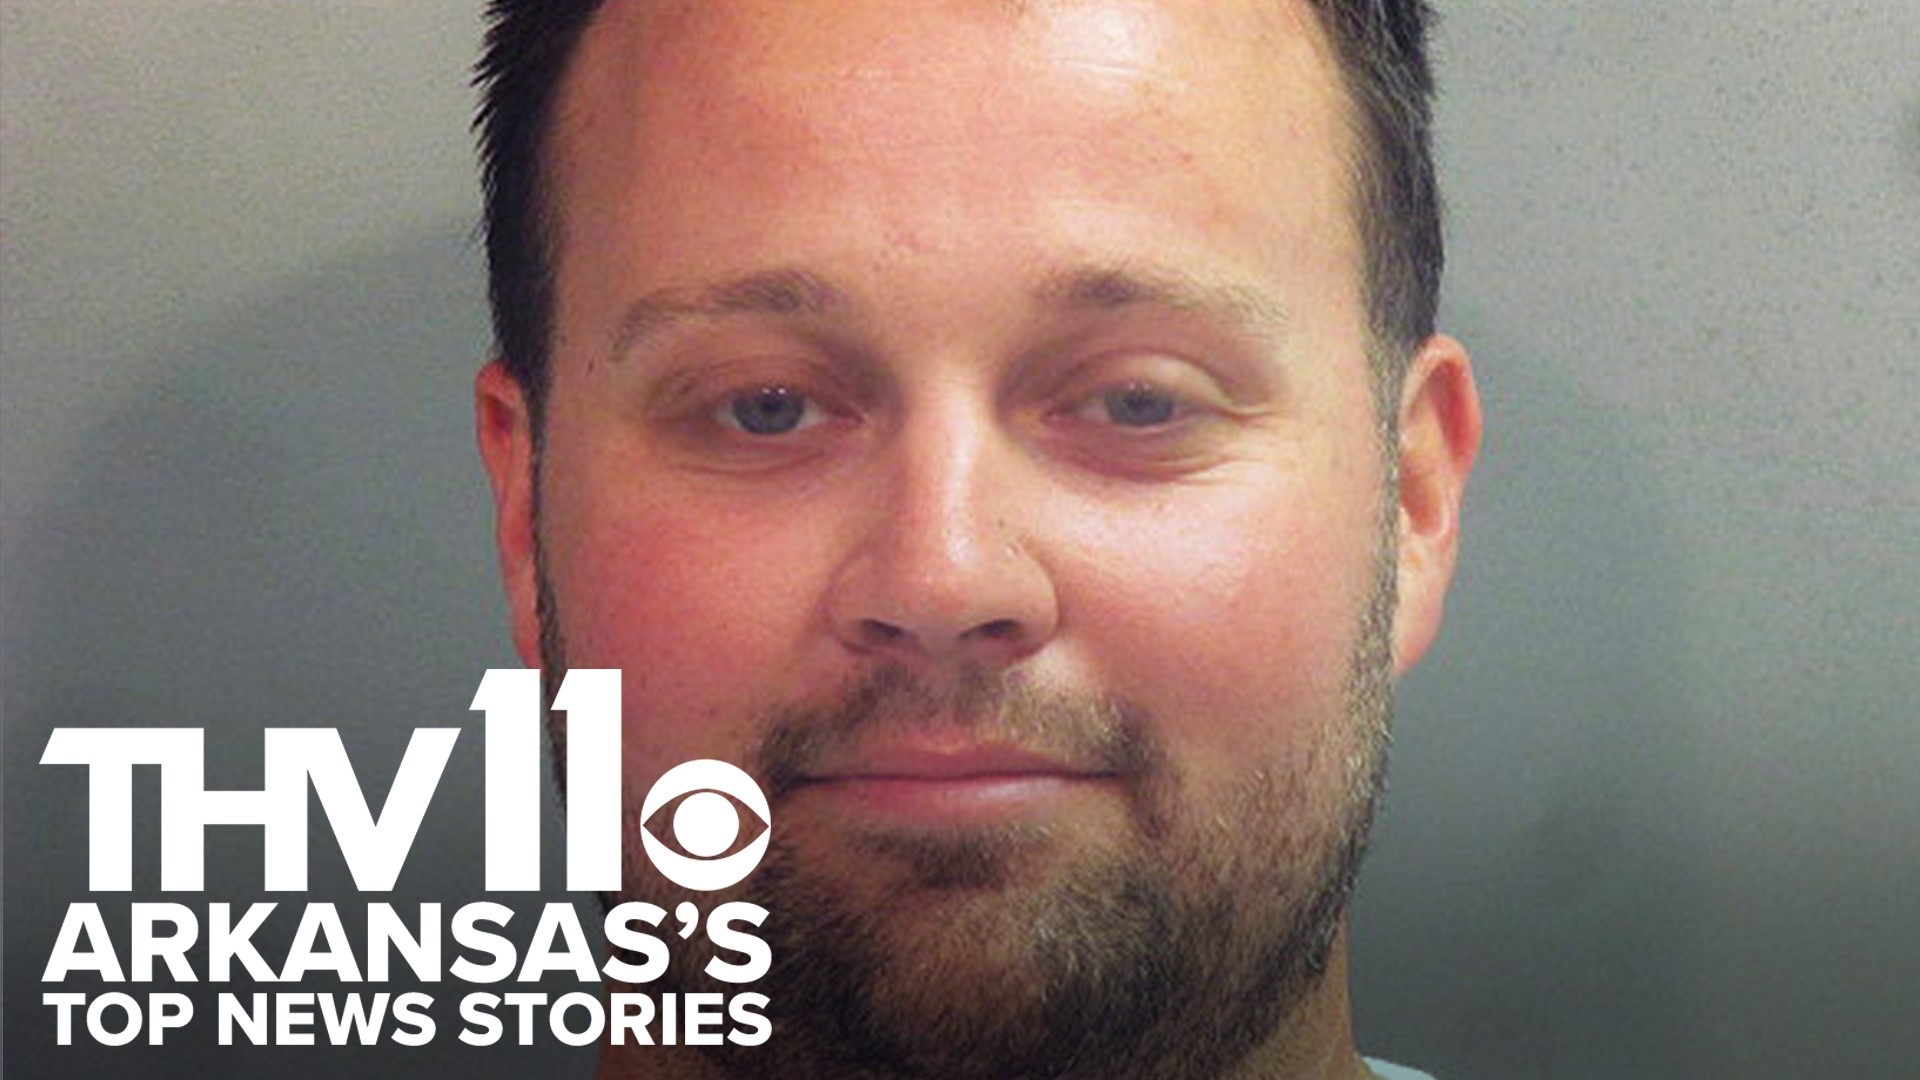 Michael Aaron presents top news stories across Arkansas for March 22, including the effects of the heavy rainfall and an update on the sentencing of Josh Duggar.